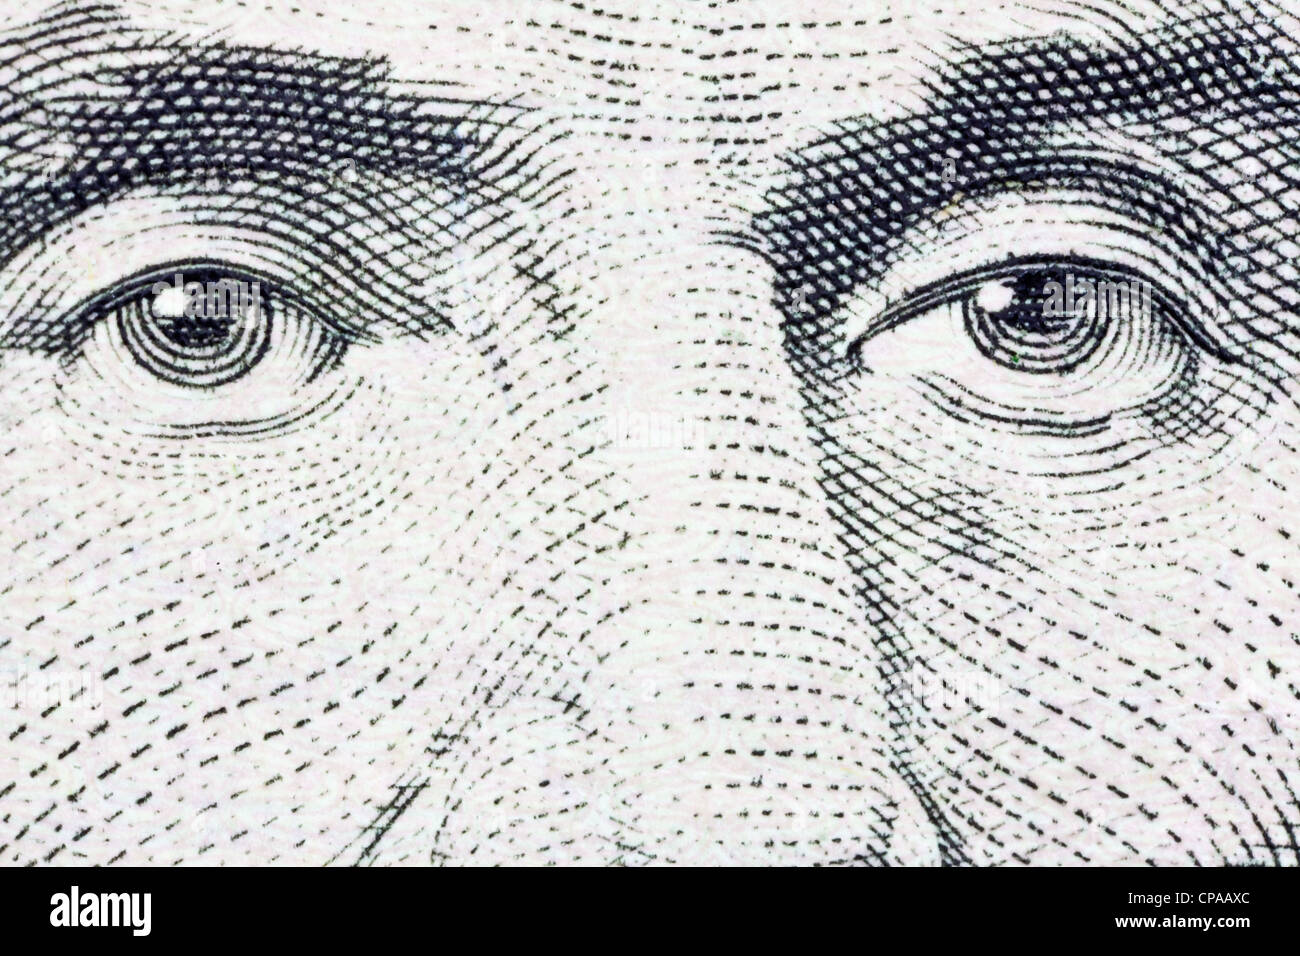 Extreme macro of Lincoln's eyes on the US five dollar bill. Stock Photo